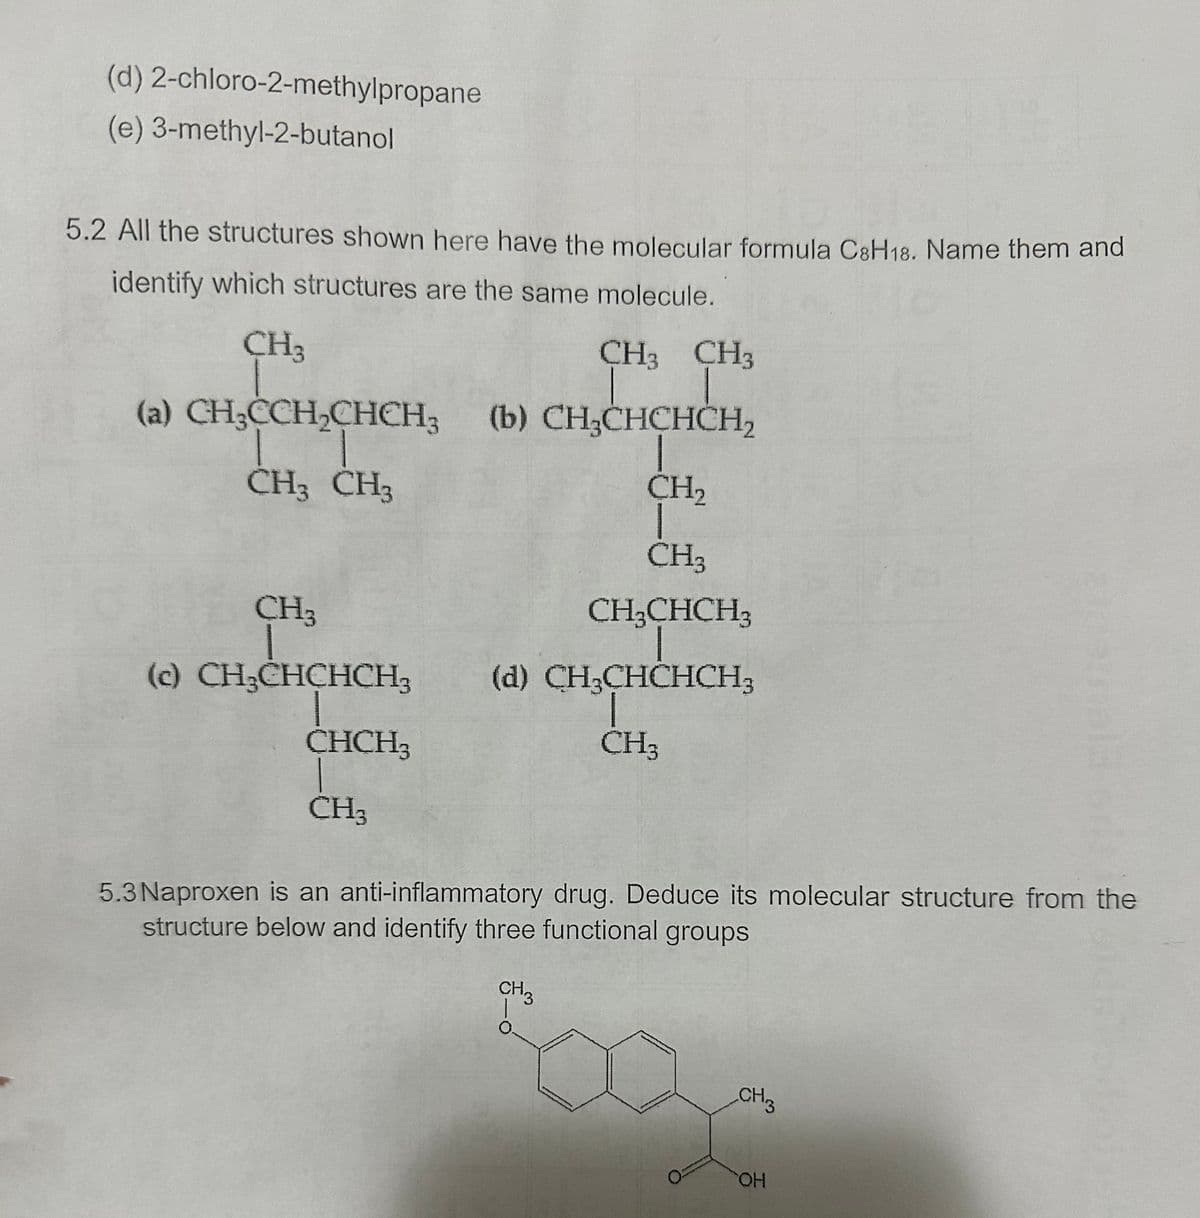 (d) 2-chloro-2-methylpropane
(e) 3-methyl-2-butanol
5.2 All the structures shown here have the molecular formula C8H18. Name them and
identify which structures are the same molecule.
CH3
CH3 CH3
(a) CH3CCH2CHCH3 (b) CH₂CHCHCH₂
CH3 CH3
CH₂
CH3
CH3
(c) CH3CHCHCH3
CH3CHCH3
(d) CH3CHCHCH3
CHCH3
CH3
CH3
5.3 Naproxen is an anti-inflammatory drug. Deduce its molecular structure from the
structure below and identify three functional groups
CH3
CH3
OH
HO